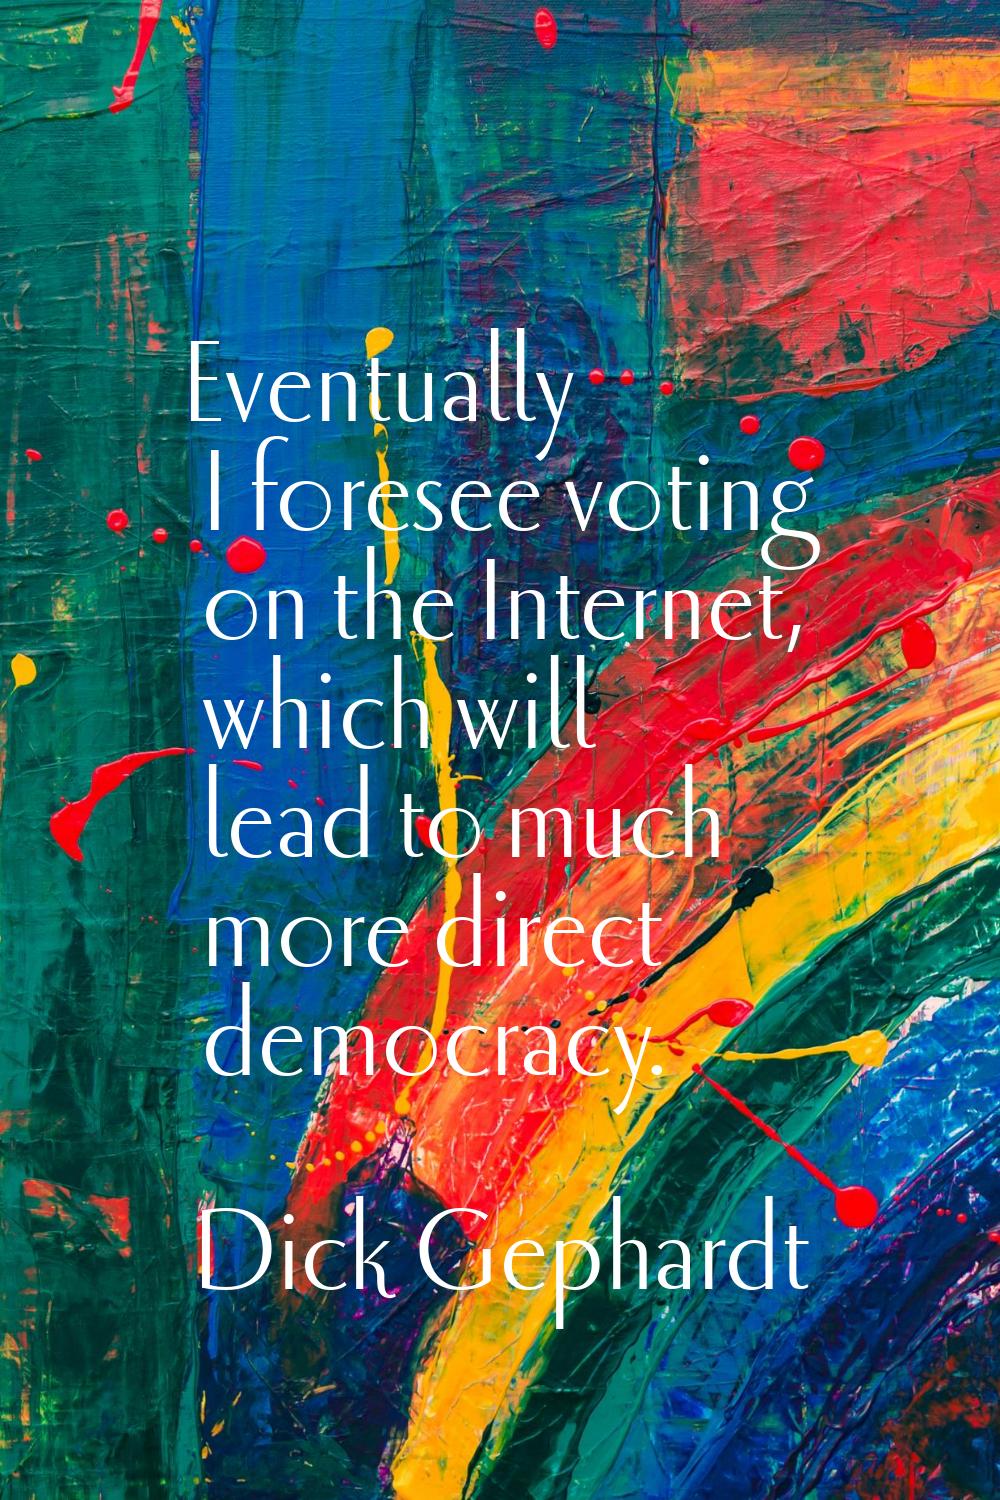 Eventually I foresee voting on the Internet, which will lead to much more direct democracy.